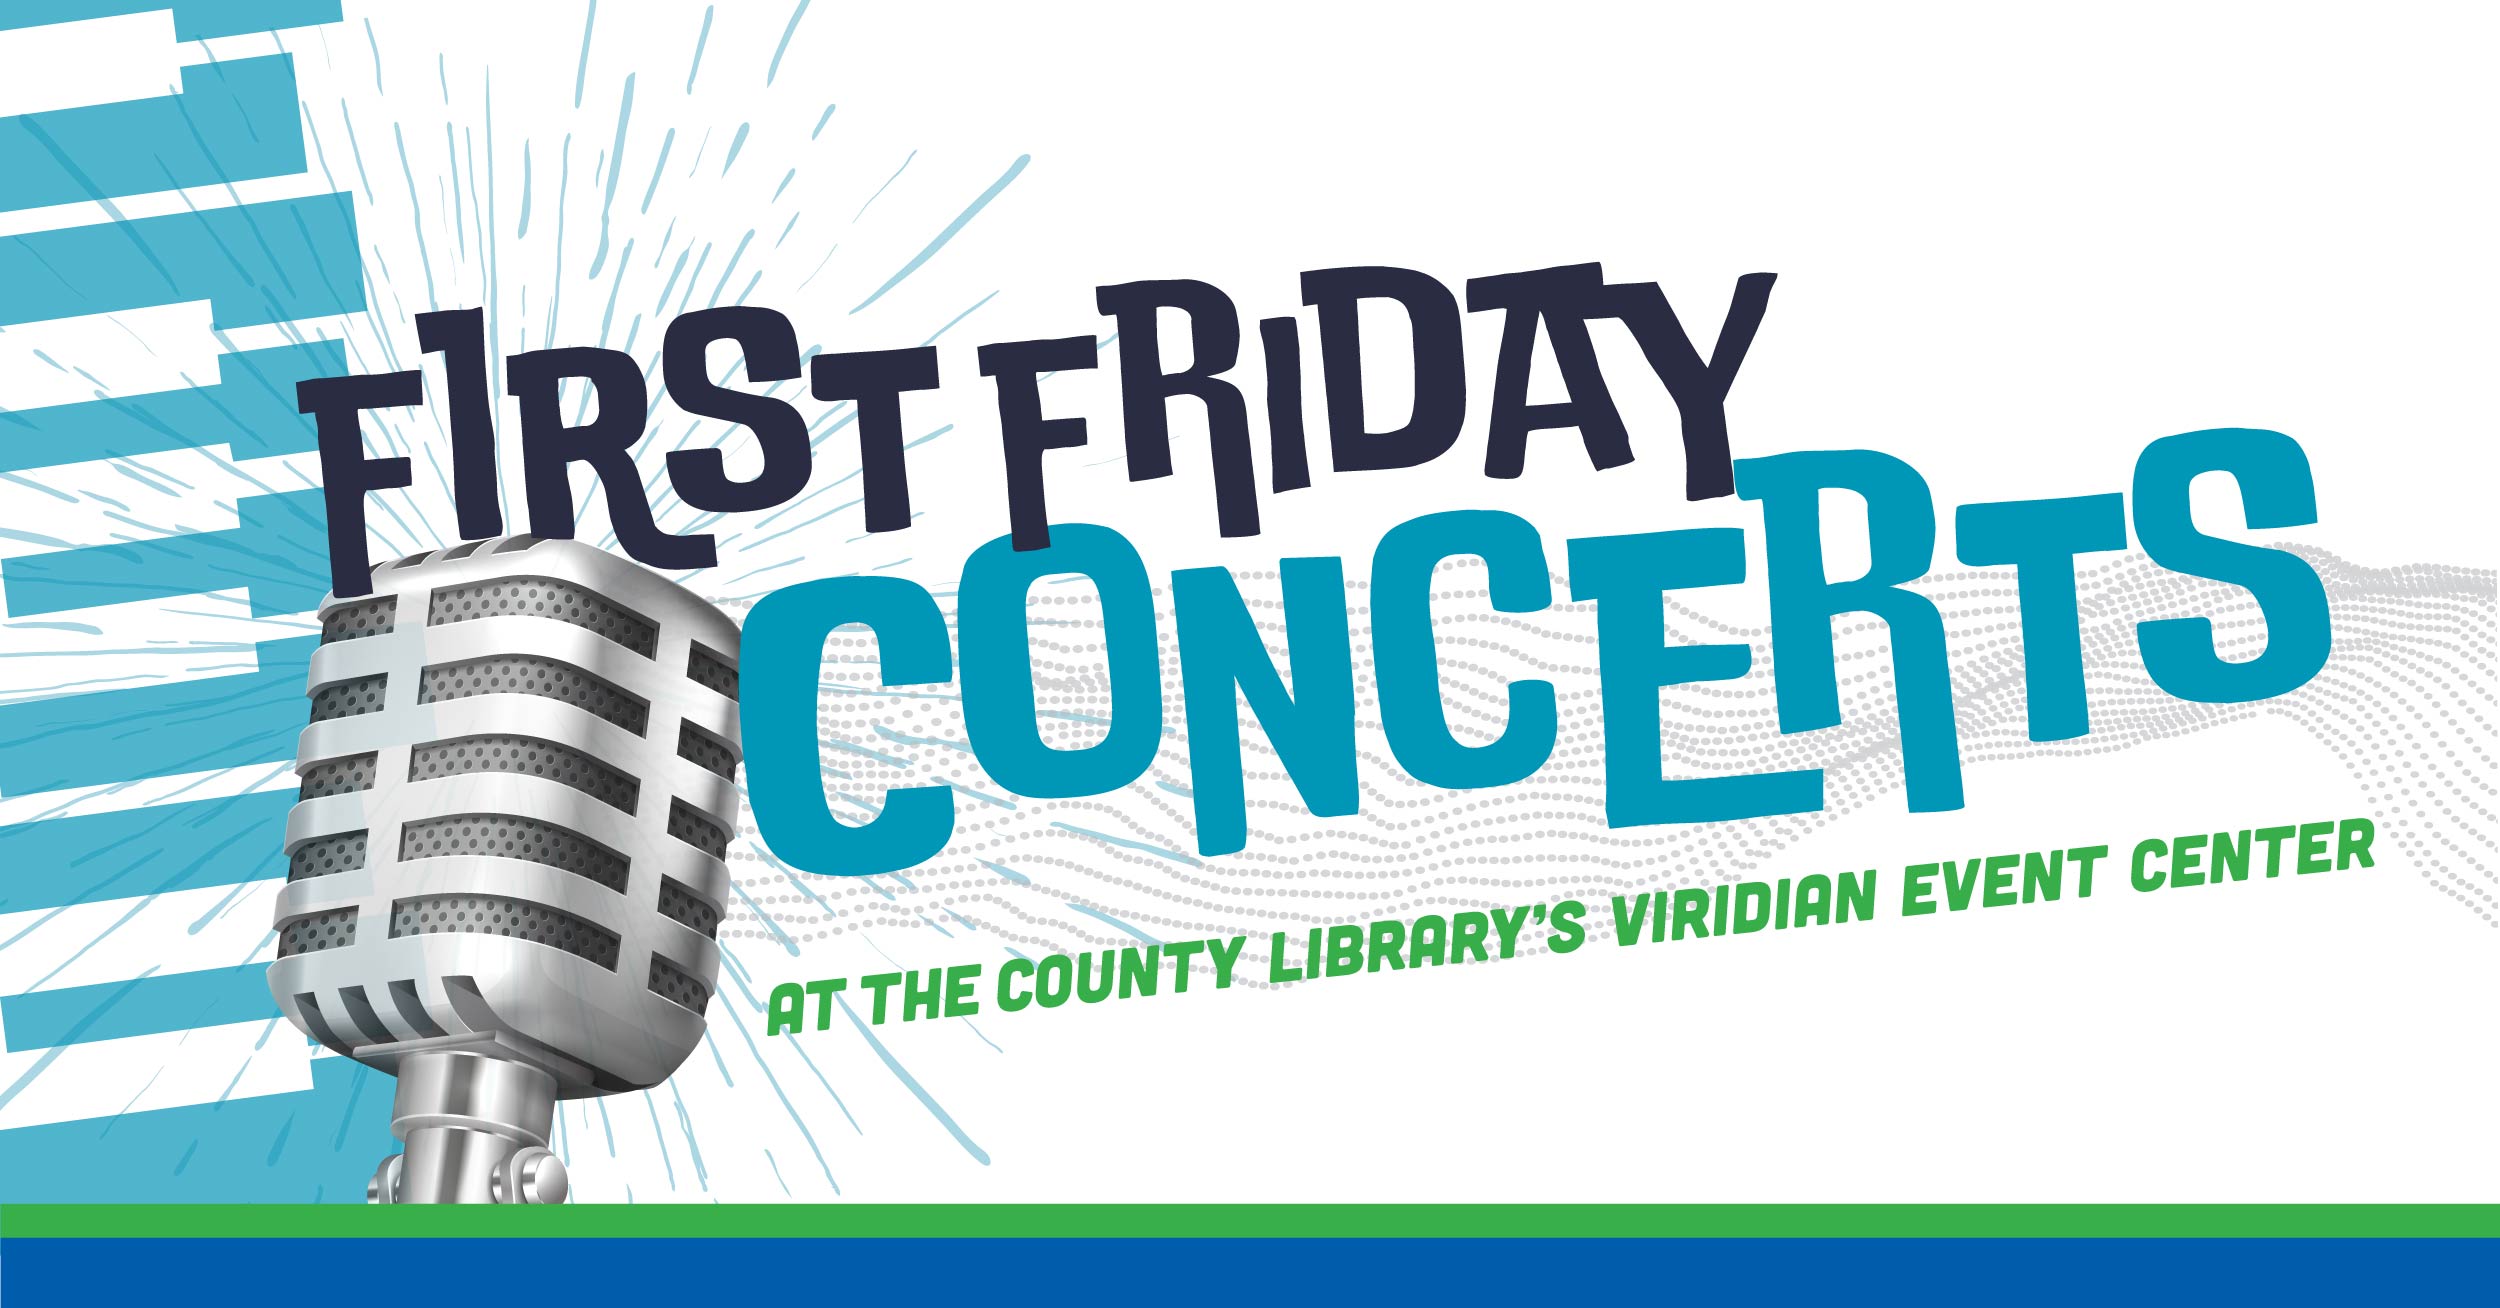 First Friday Concerts at the County Library